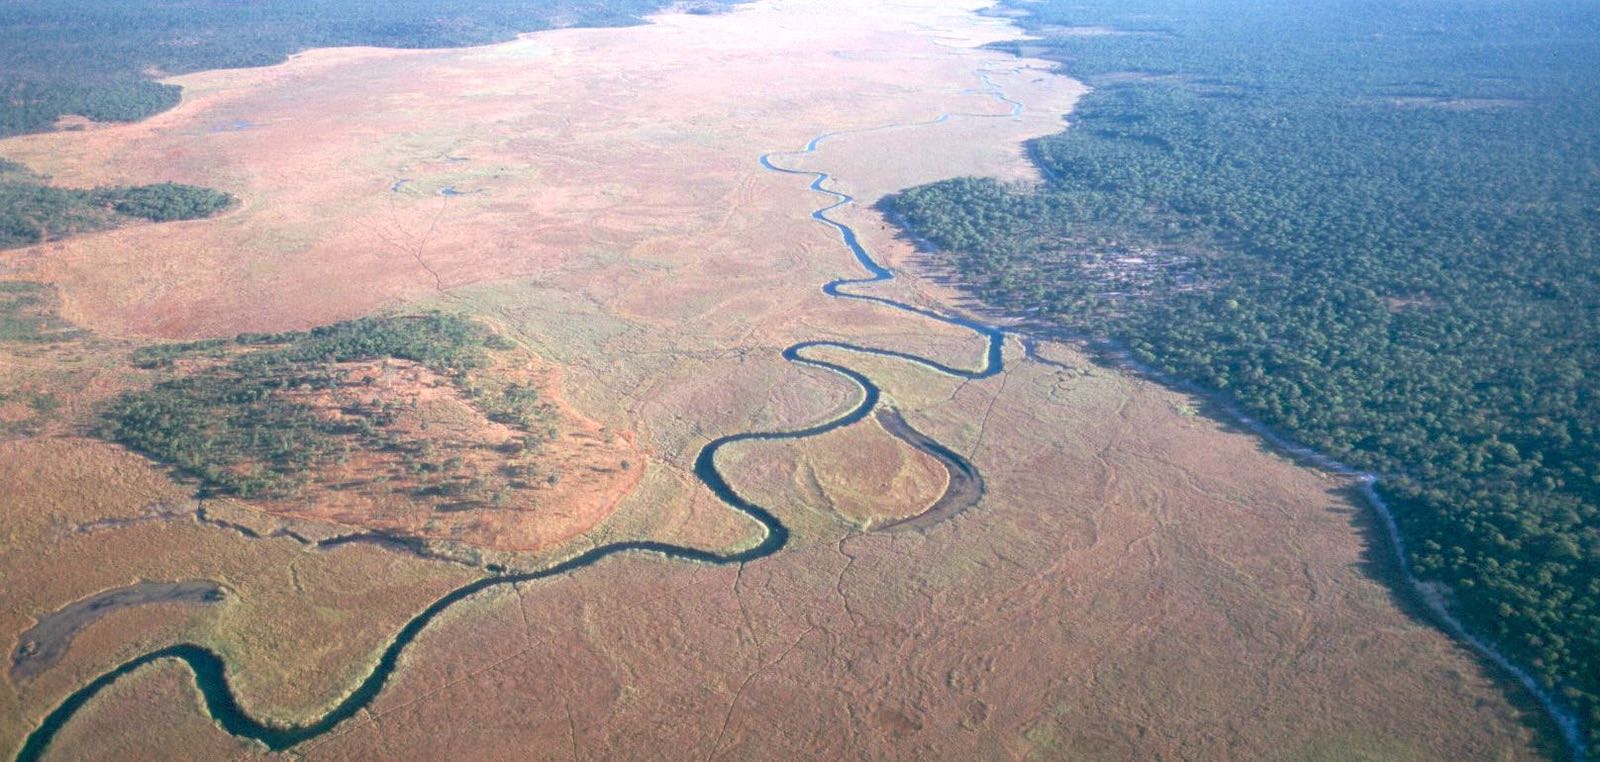 Aerial view of a narrow channel in a wide river system between thickly forested banks.